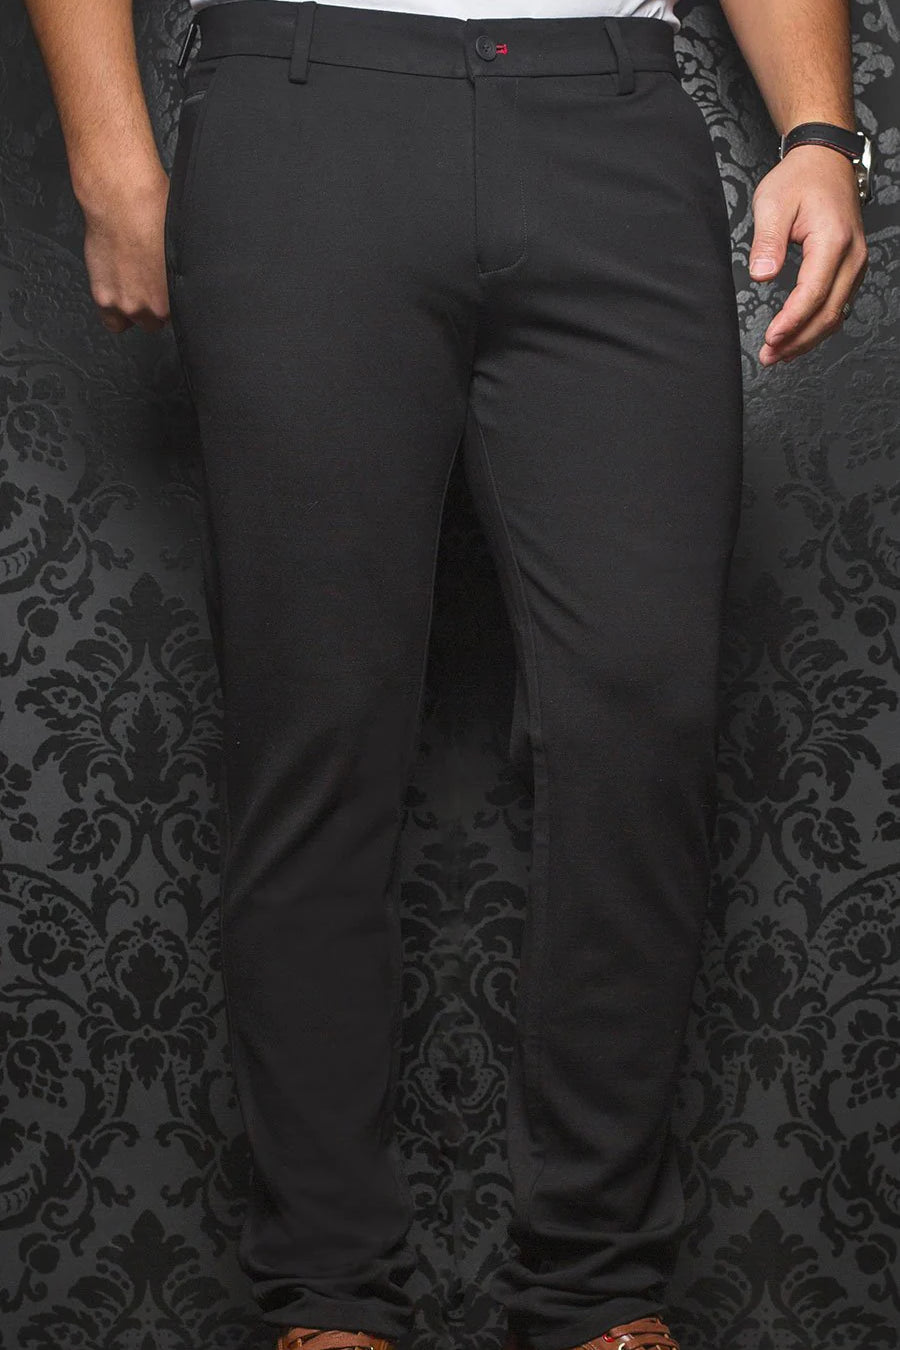 PANTS Au Noir Ultra Stretch PANTS dressy and casual fashion for men ''ON THE MOVE''. Slim fit with slanted pockets. Super comfortable with high quality cotton fabric. Offers confidence and freedom of movement.